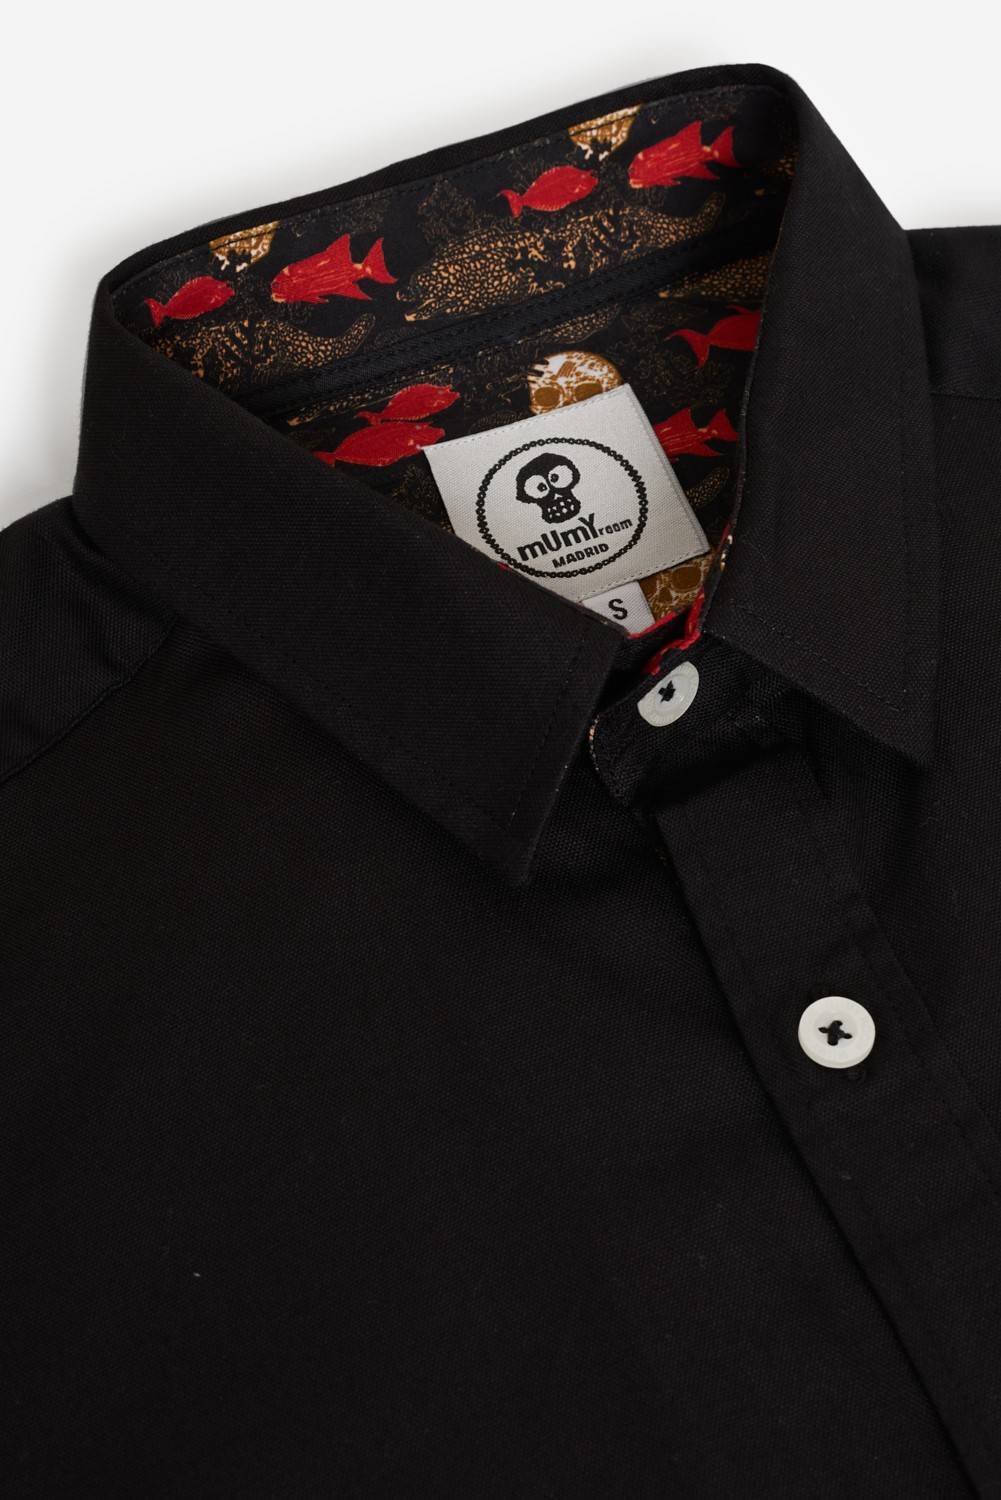 ADULT'S PRINTED SHIRT CLASSIC LINE B. SKULLS AND FISHES